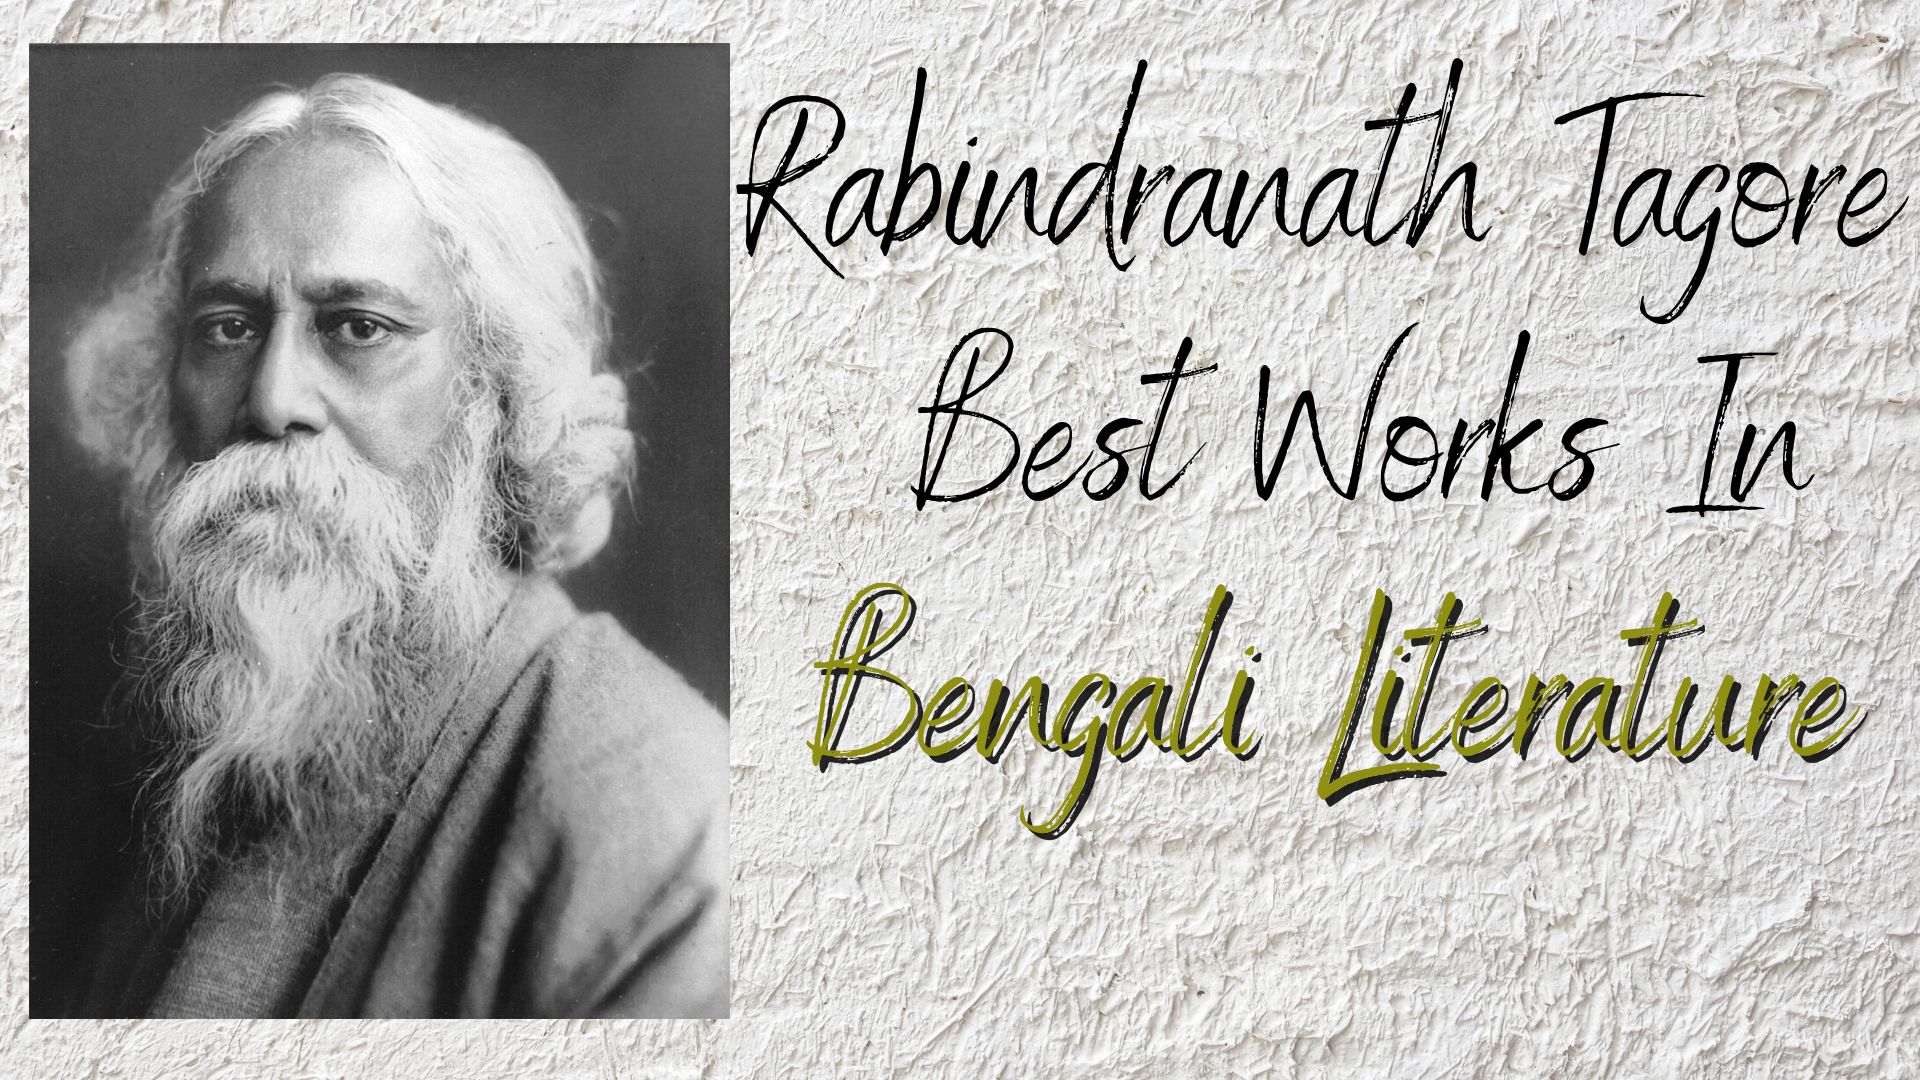 Rabindranath Tagore Best Works In Bengali Literature